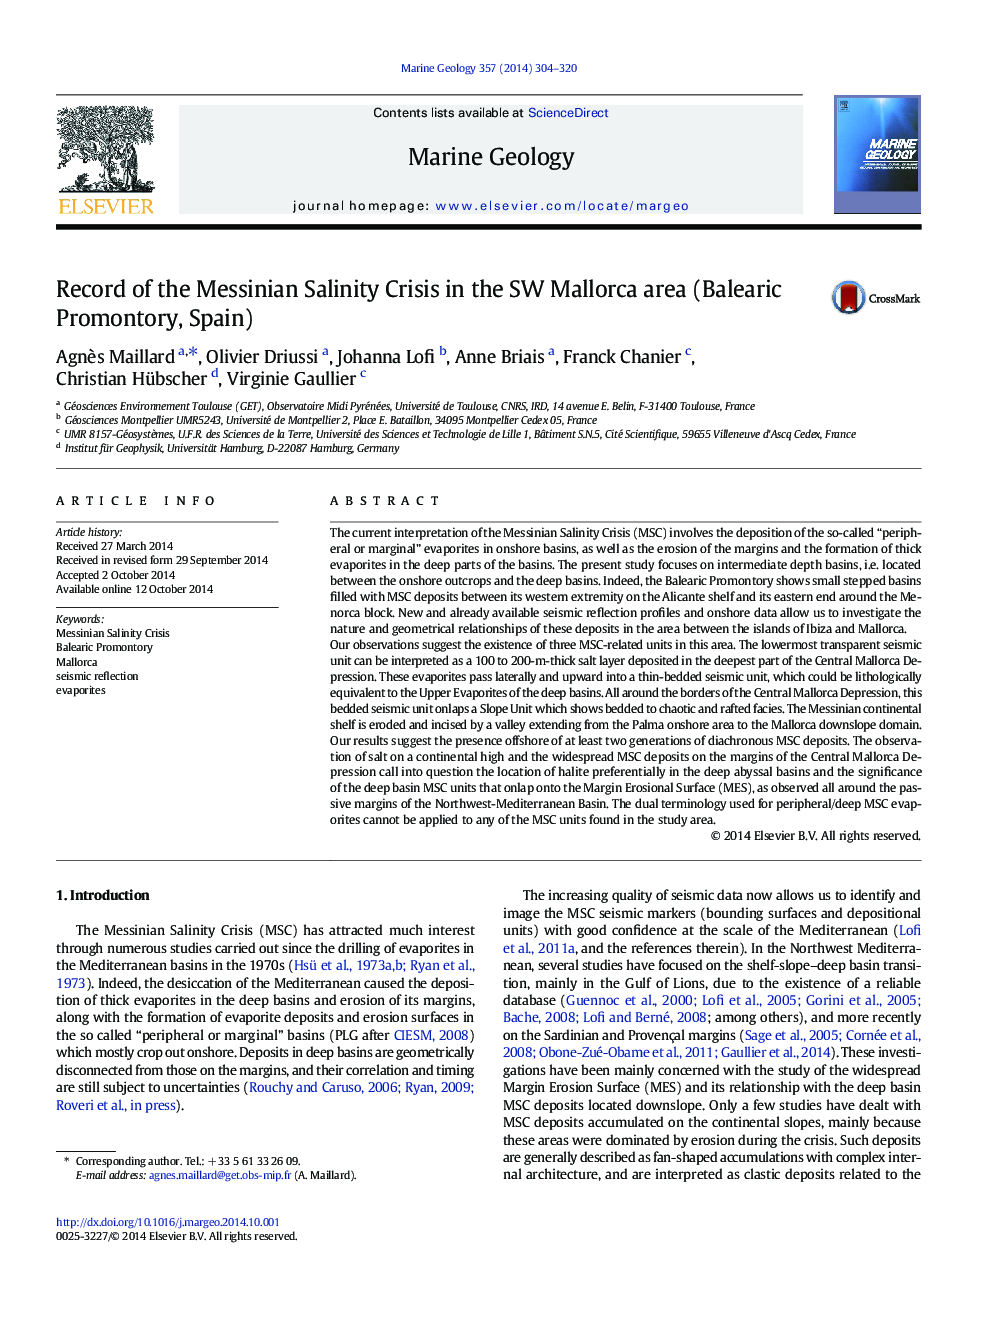 Record of the Messinian Salinity Crisis in the SW Mallorca area (Balearic Promontory, Spain)